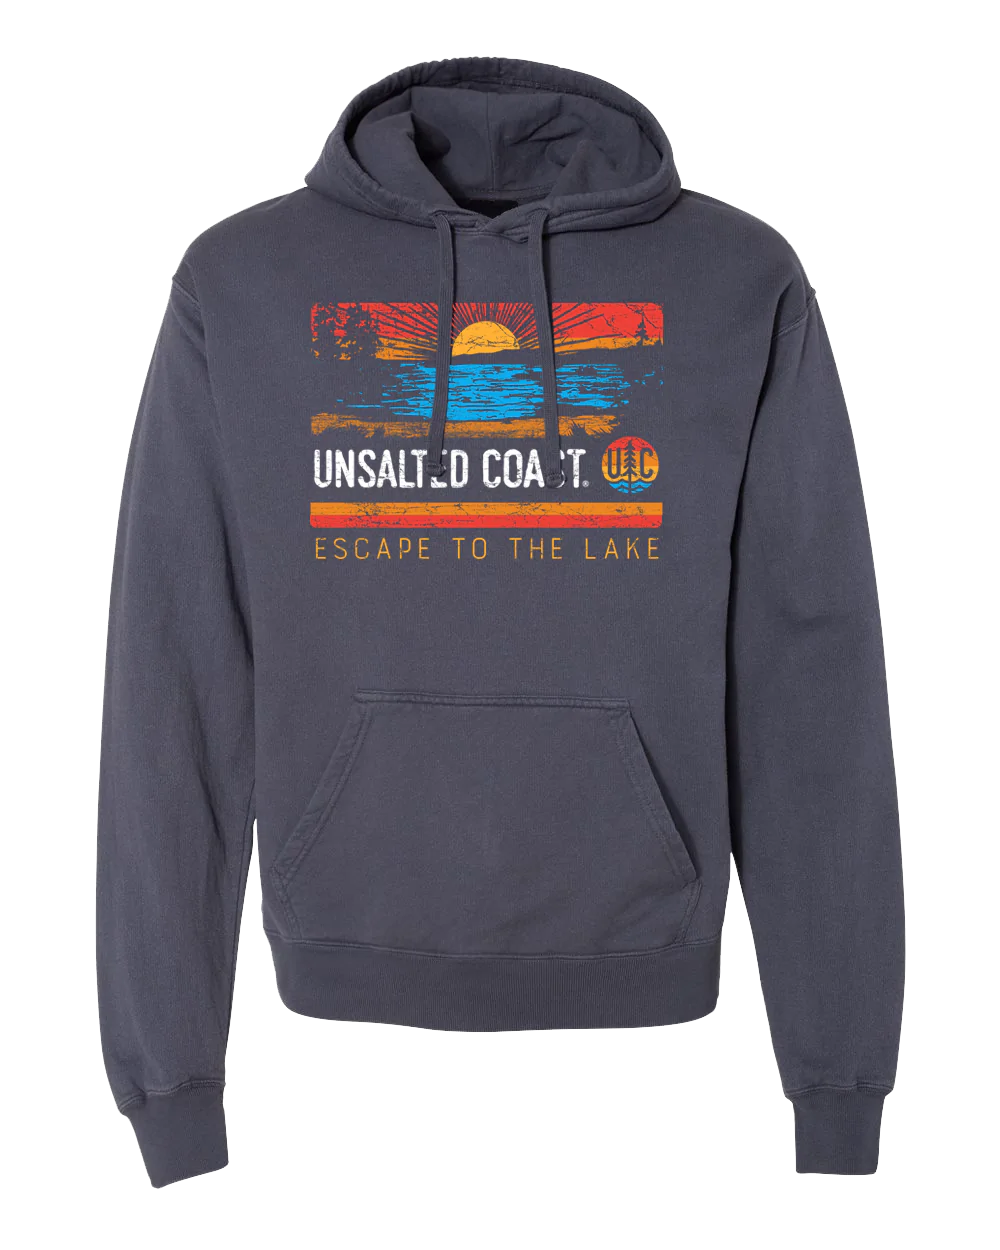 UC Escape to the Lake Hoodie